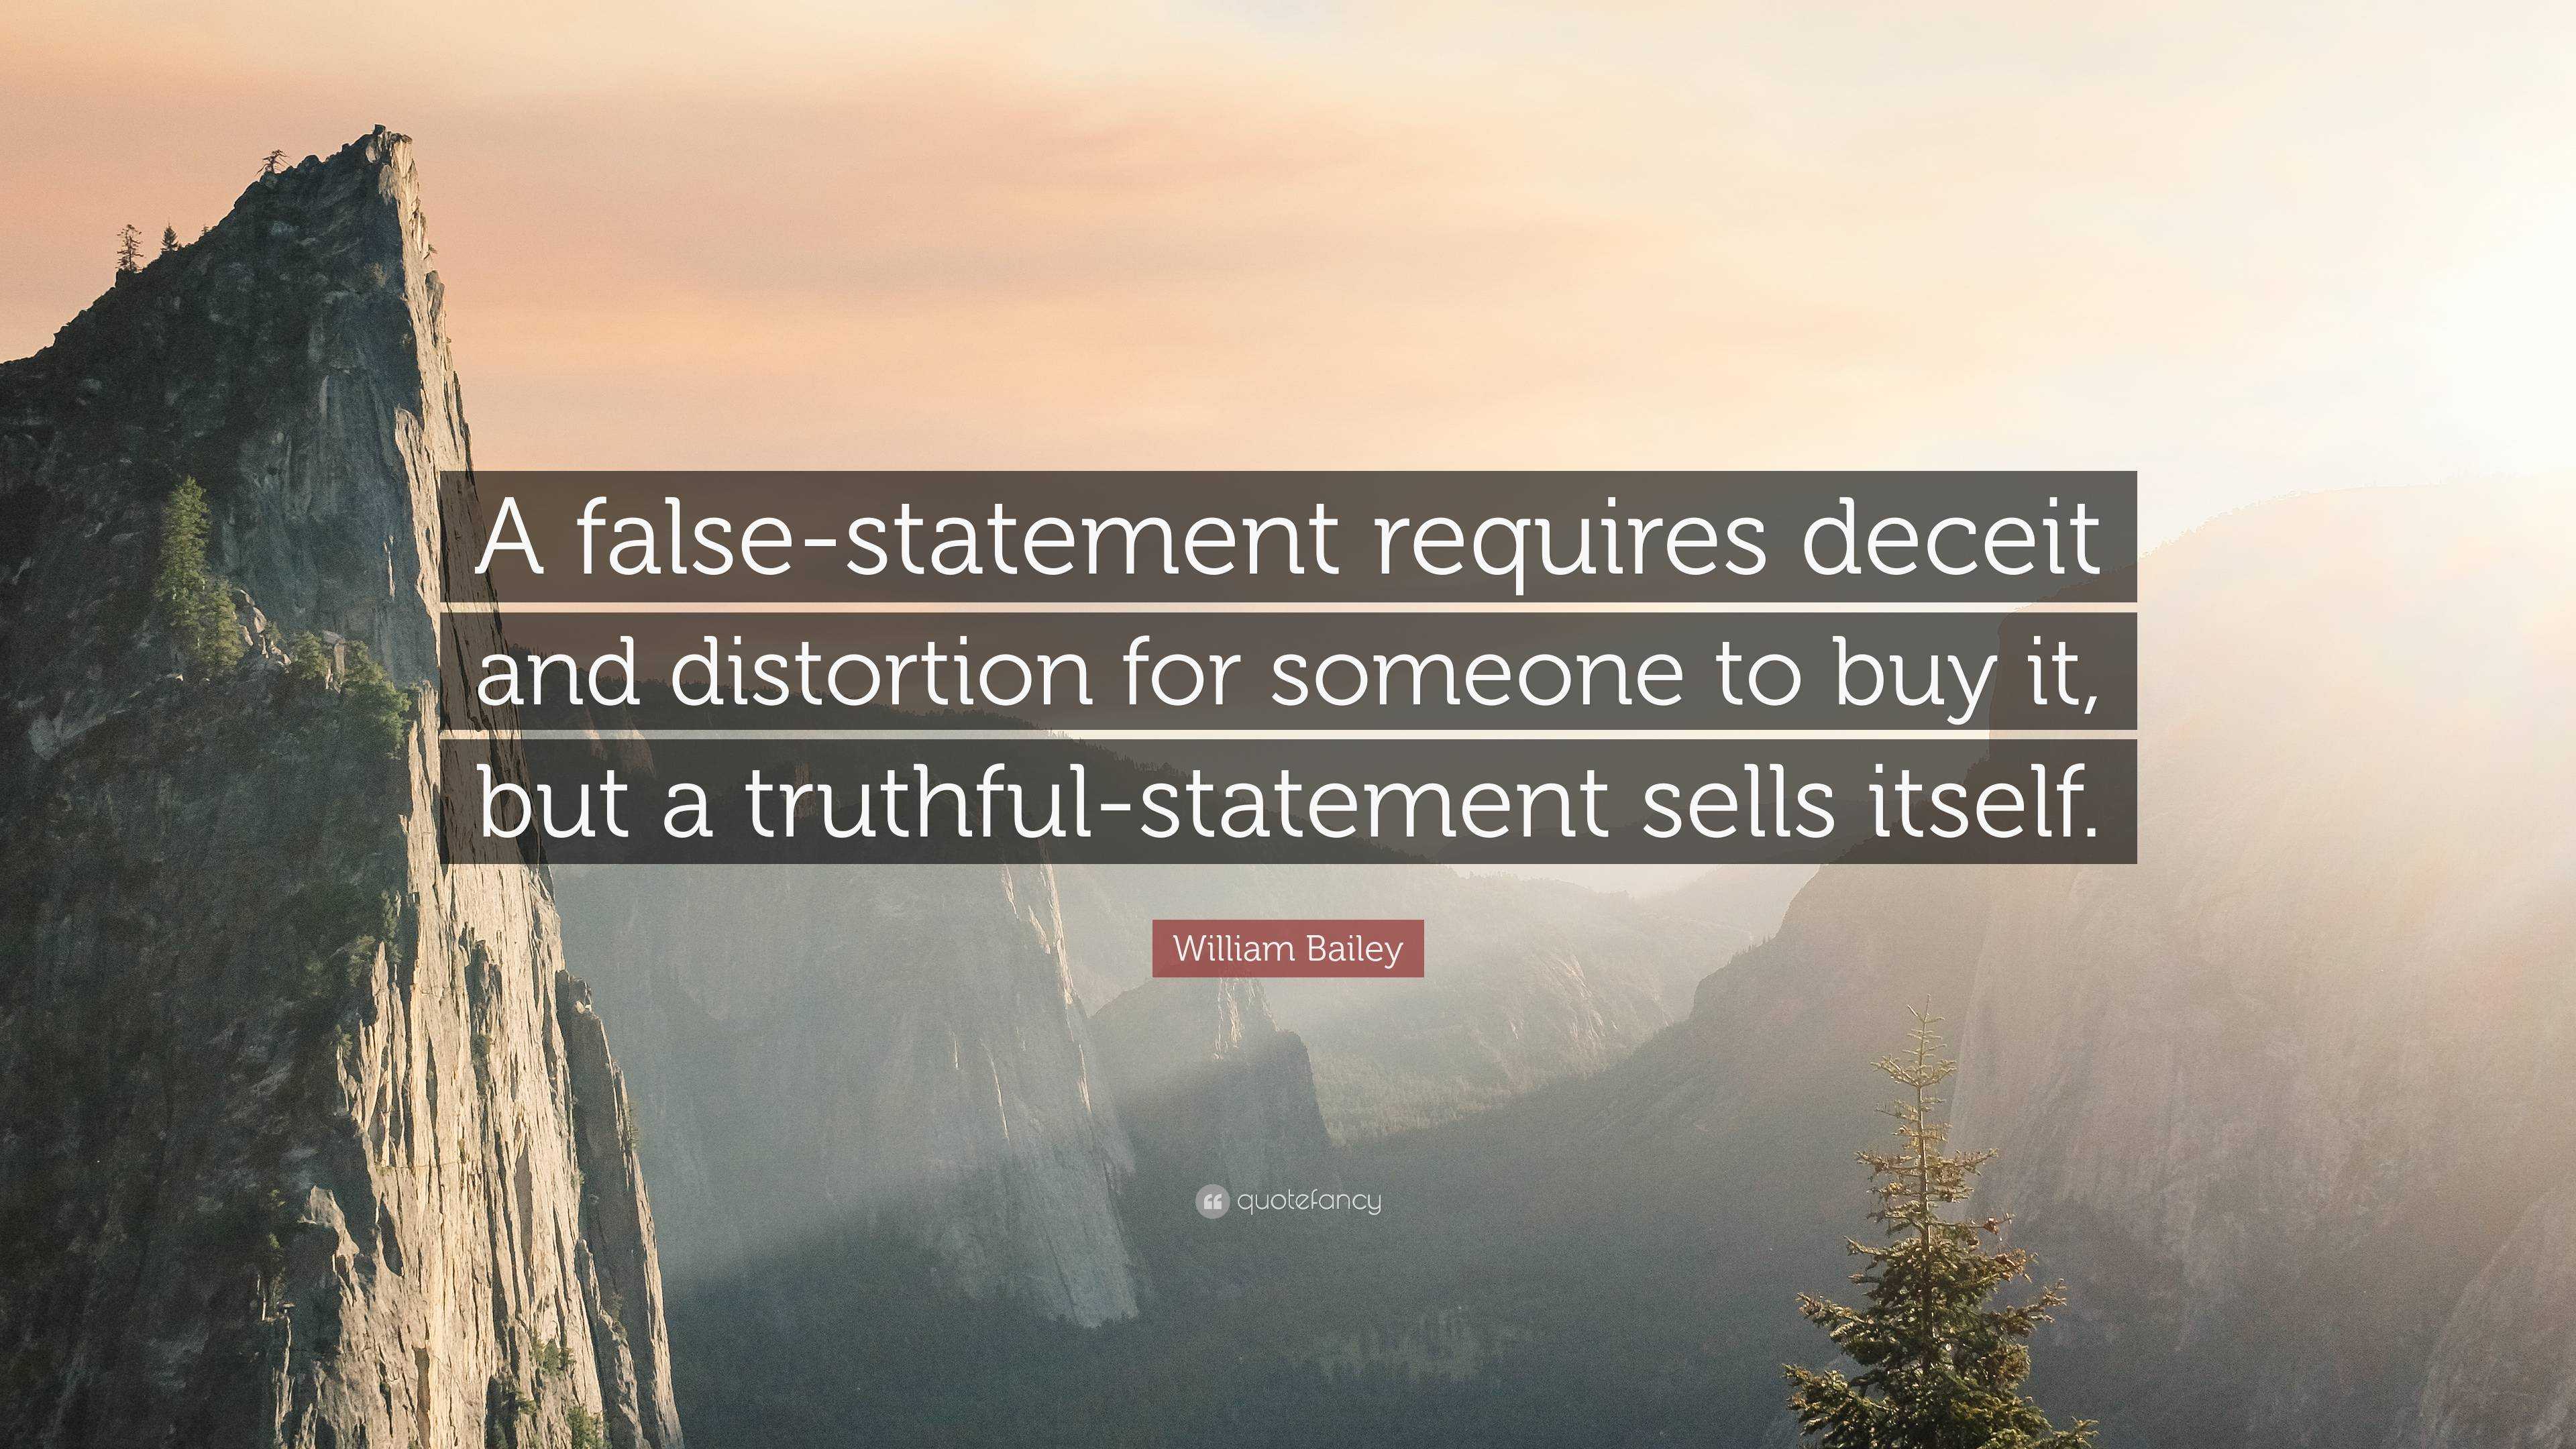 William Bailey Quote: “A false-statement requires deceit and distortion ...